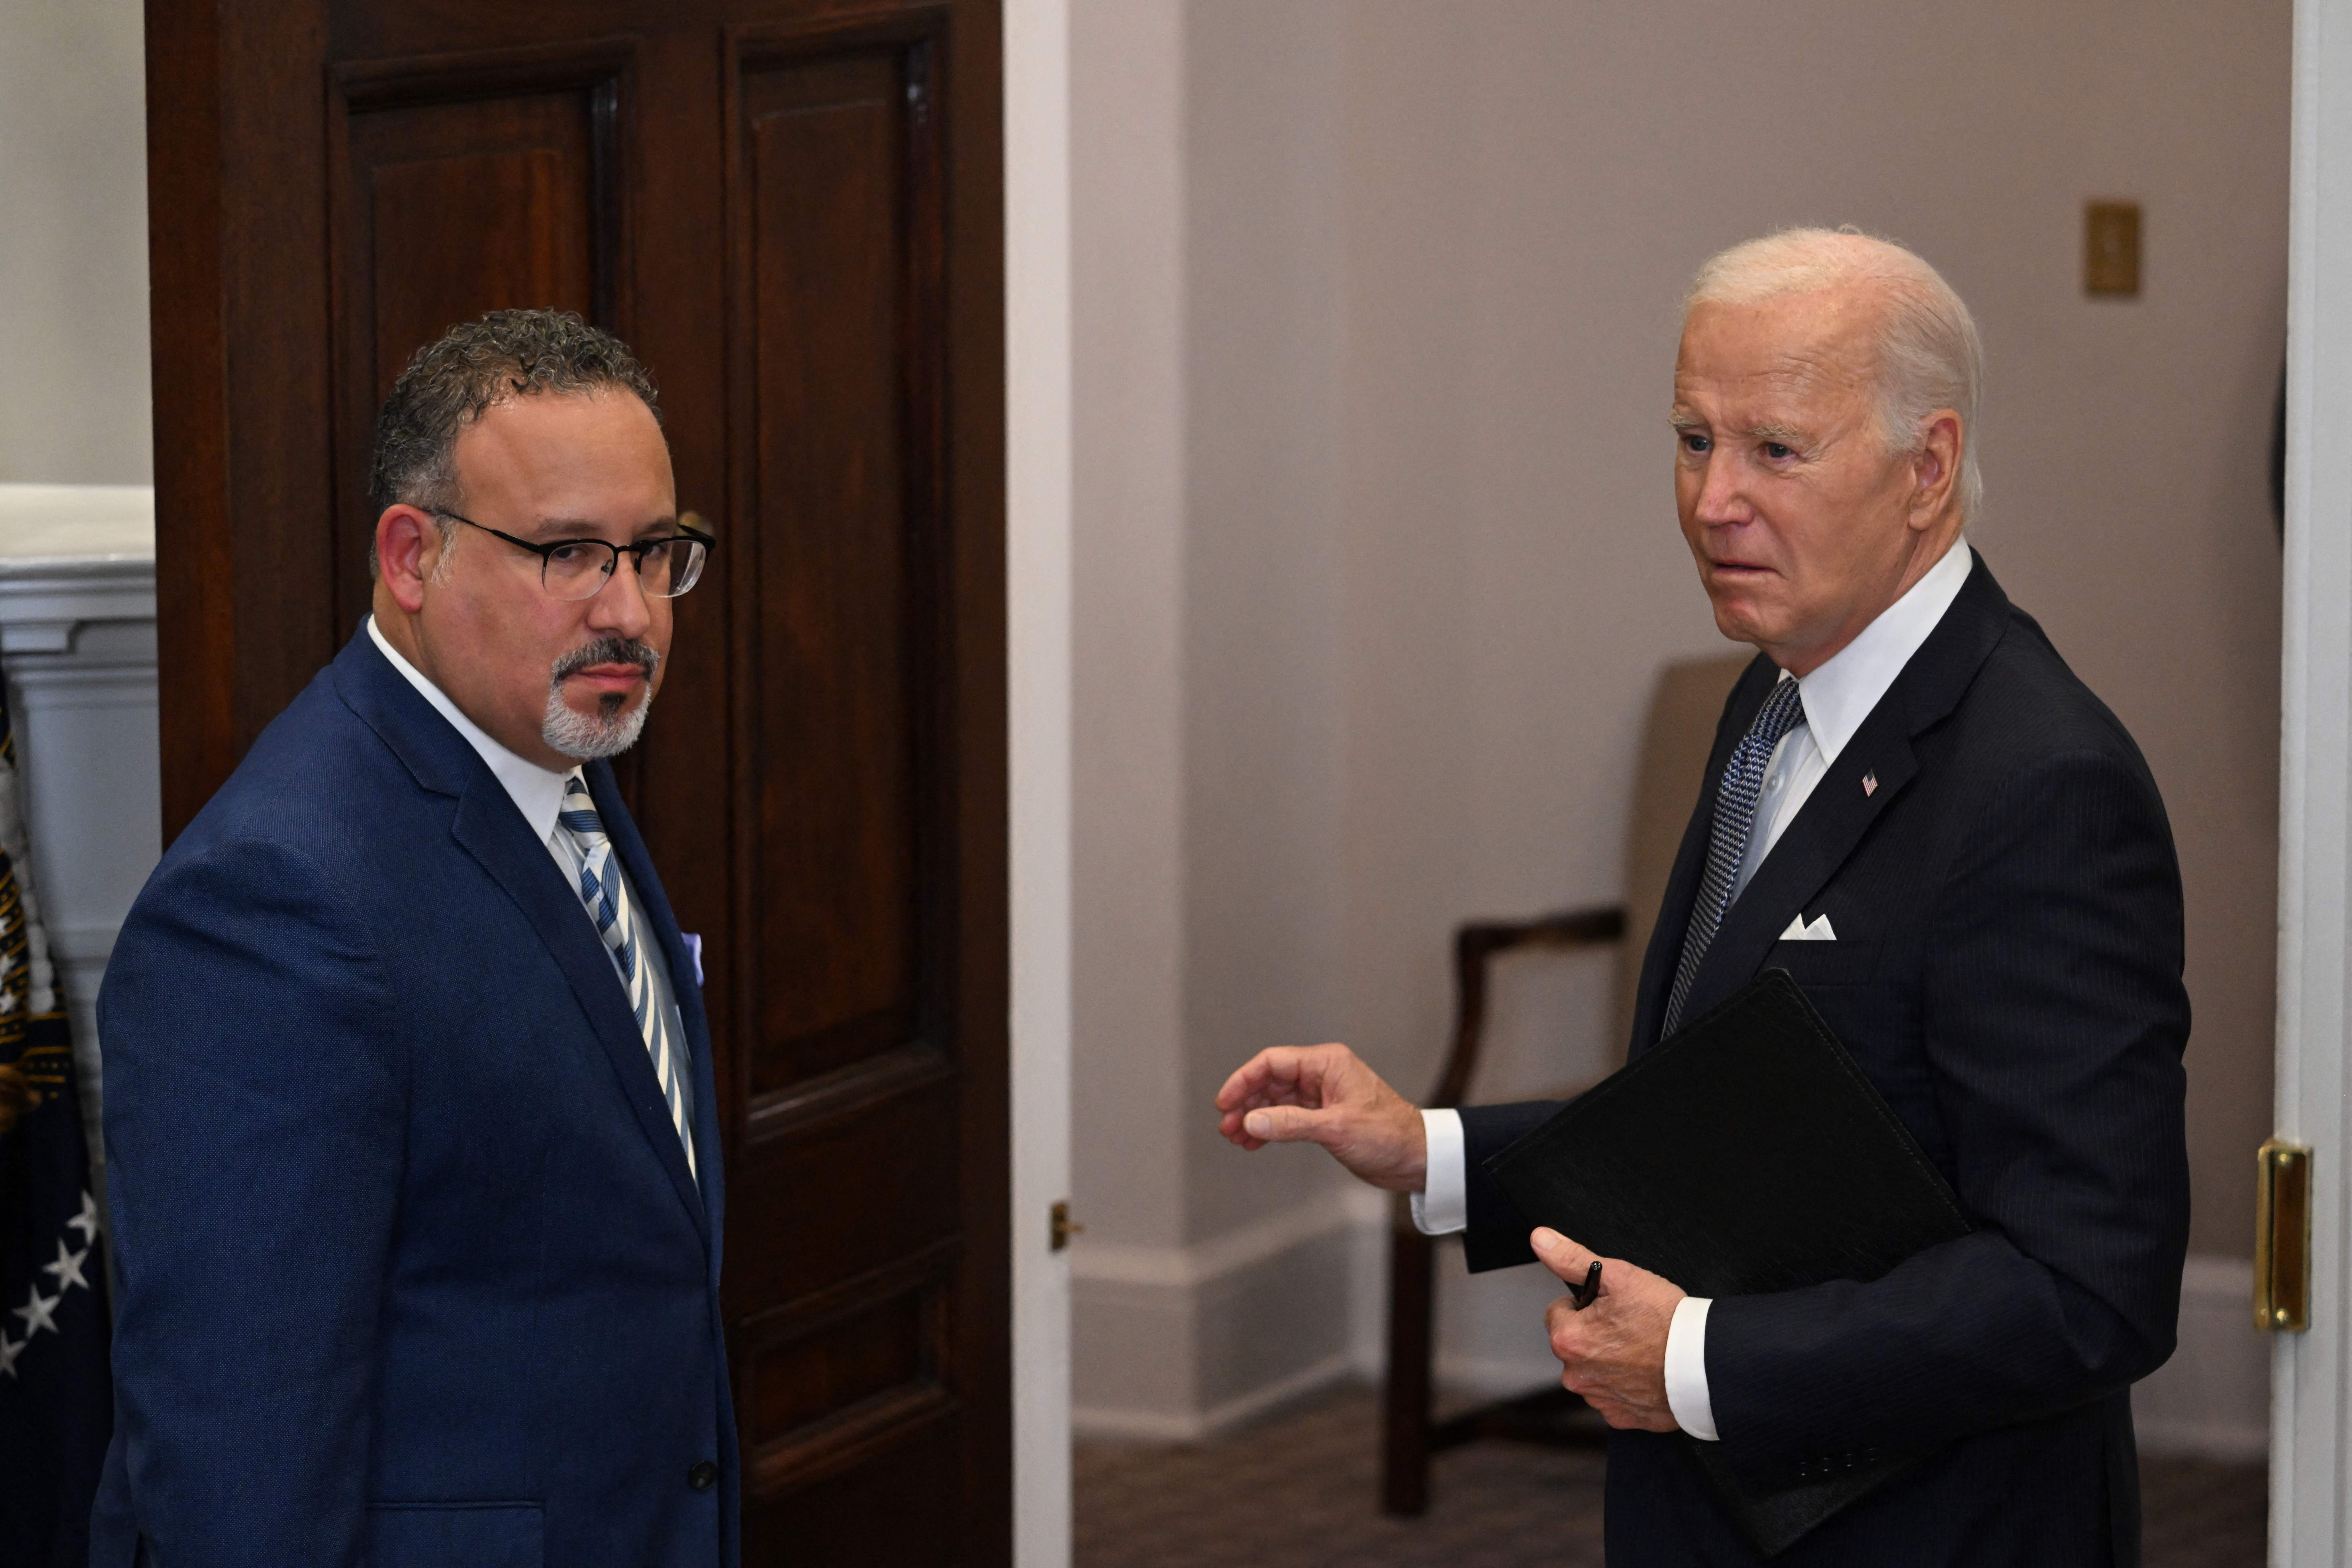 US President Joe Biden and Education Secretary Miguel Cardona leave after speaking about the US Supreme Court's decision overruling student debt forgiveness as Education Secretary Miguel Cardona looks on in the Roosevelt Room of the White House in Washington, DC, on June 30, 2023. The court said Biden had overstepped his powers in cancelling more than $400 billion in debt, in an effort to alleviate the financial burden of education that hangs over many Americans decades after they finished their studies. (Photo by Jim WATSON / AFP) (Photo by JIM WATSON/AFP via Getty Images)